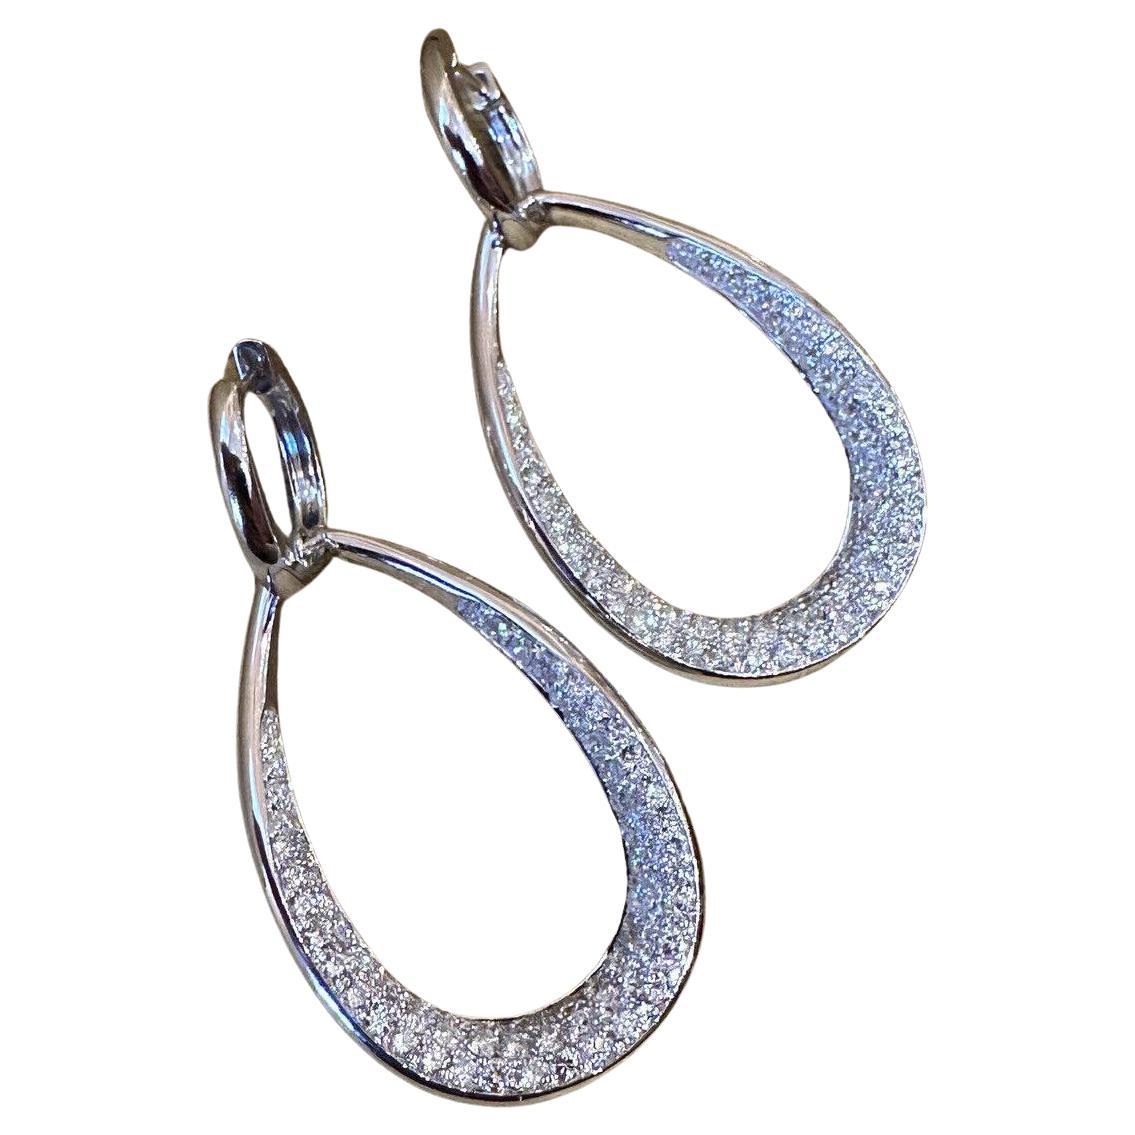 Large Open Hoop Pave Diamond Earrings 3.05 carat total weight in 18k White Gold